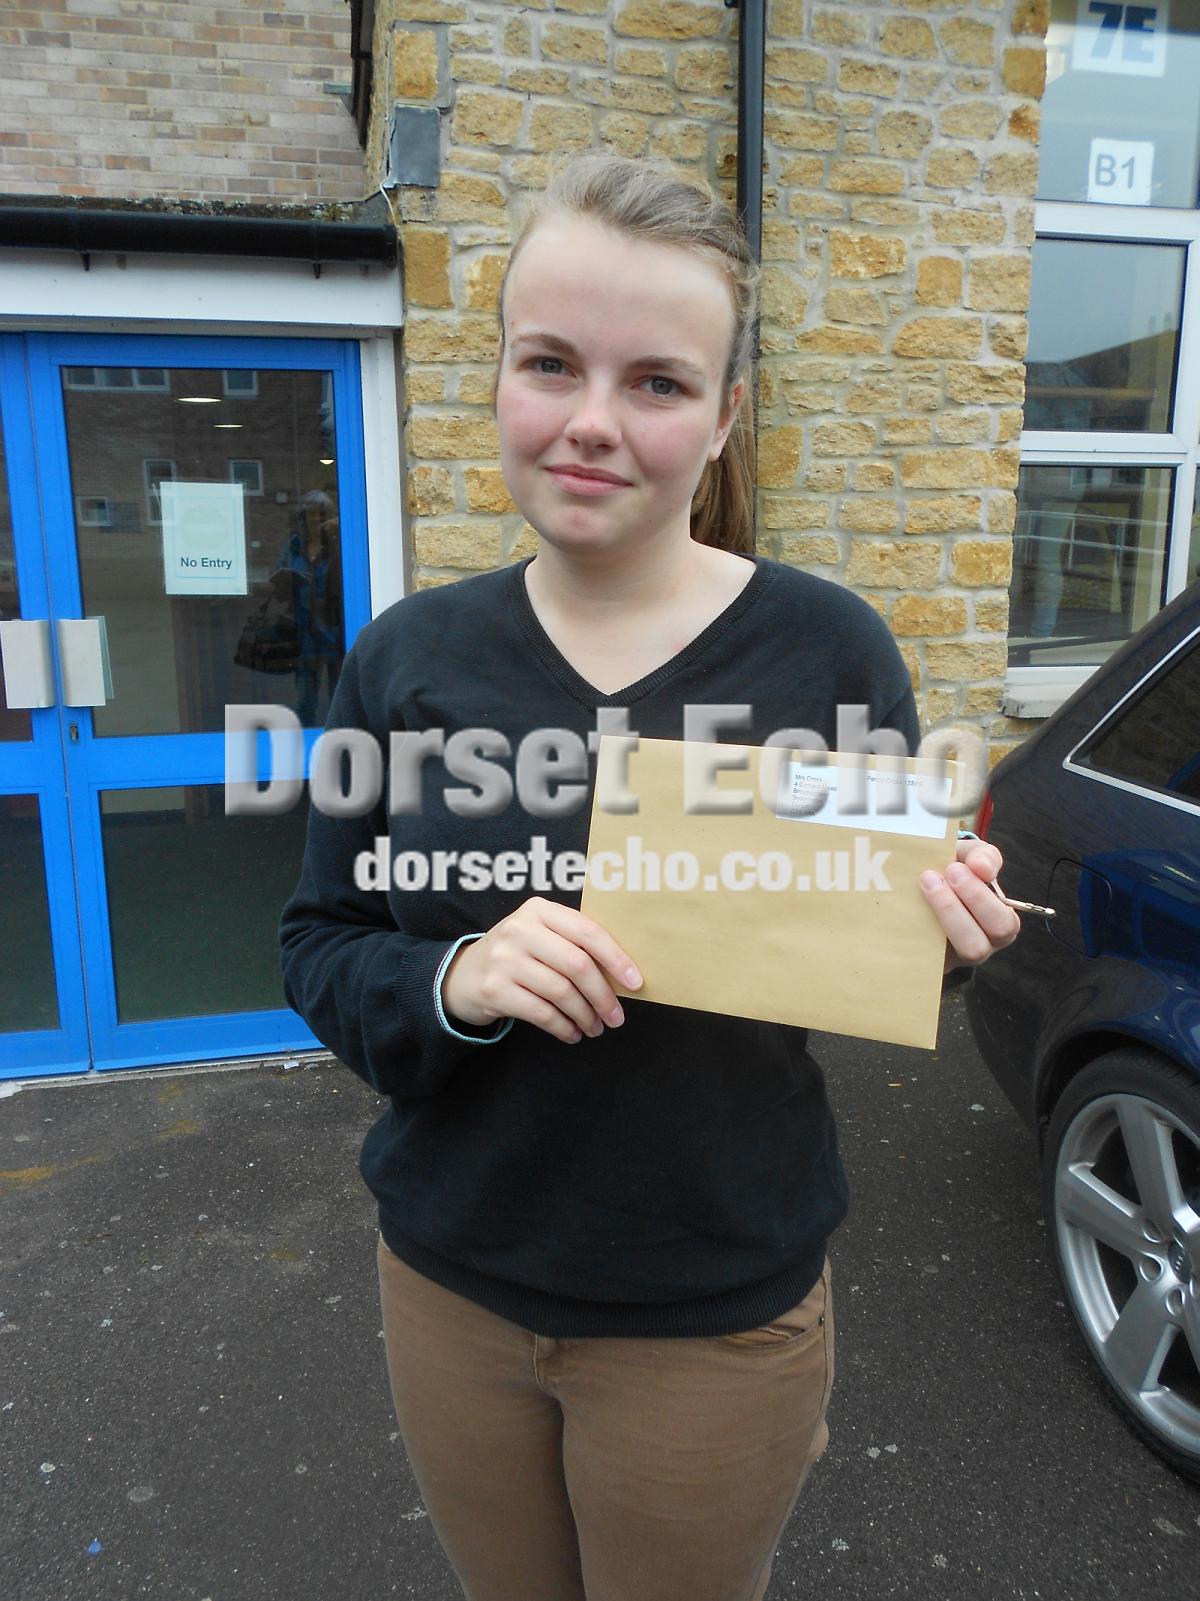 Beamister sixth form A level students with their results August 2013
too nervous to open Penny Cross